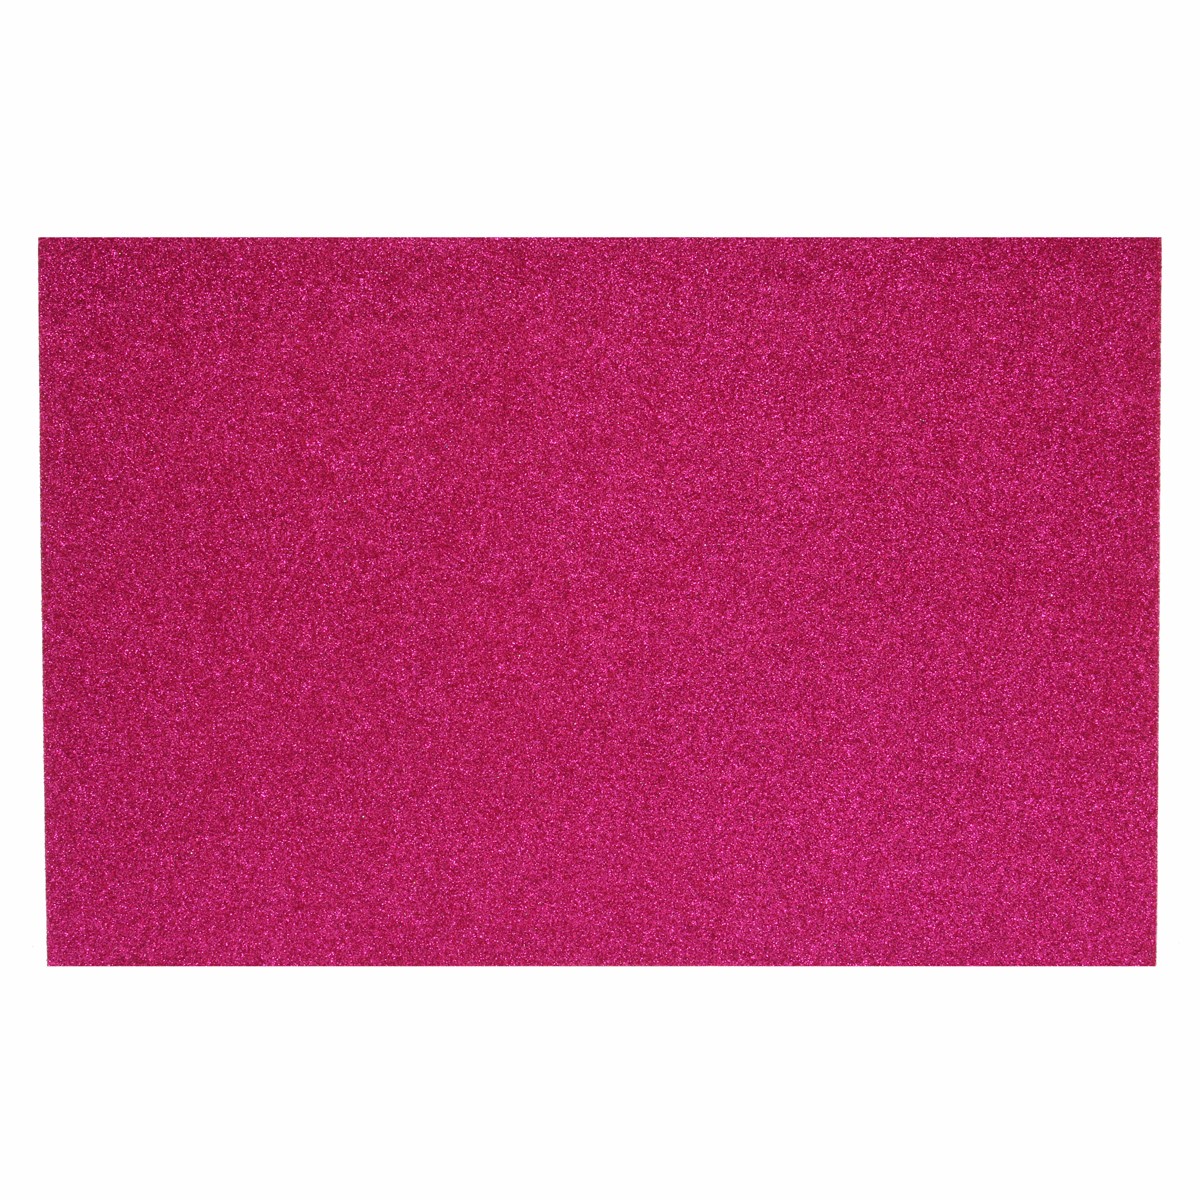 10Pcs-8x12-Inch-Adhesive-Glitter-Paper-Card-Assorted-Colors-Scrapbooking-Crafts-1114134-6